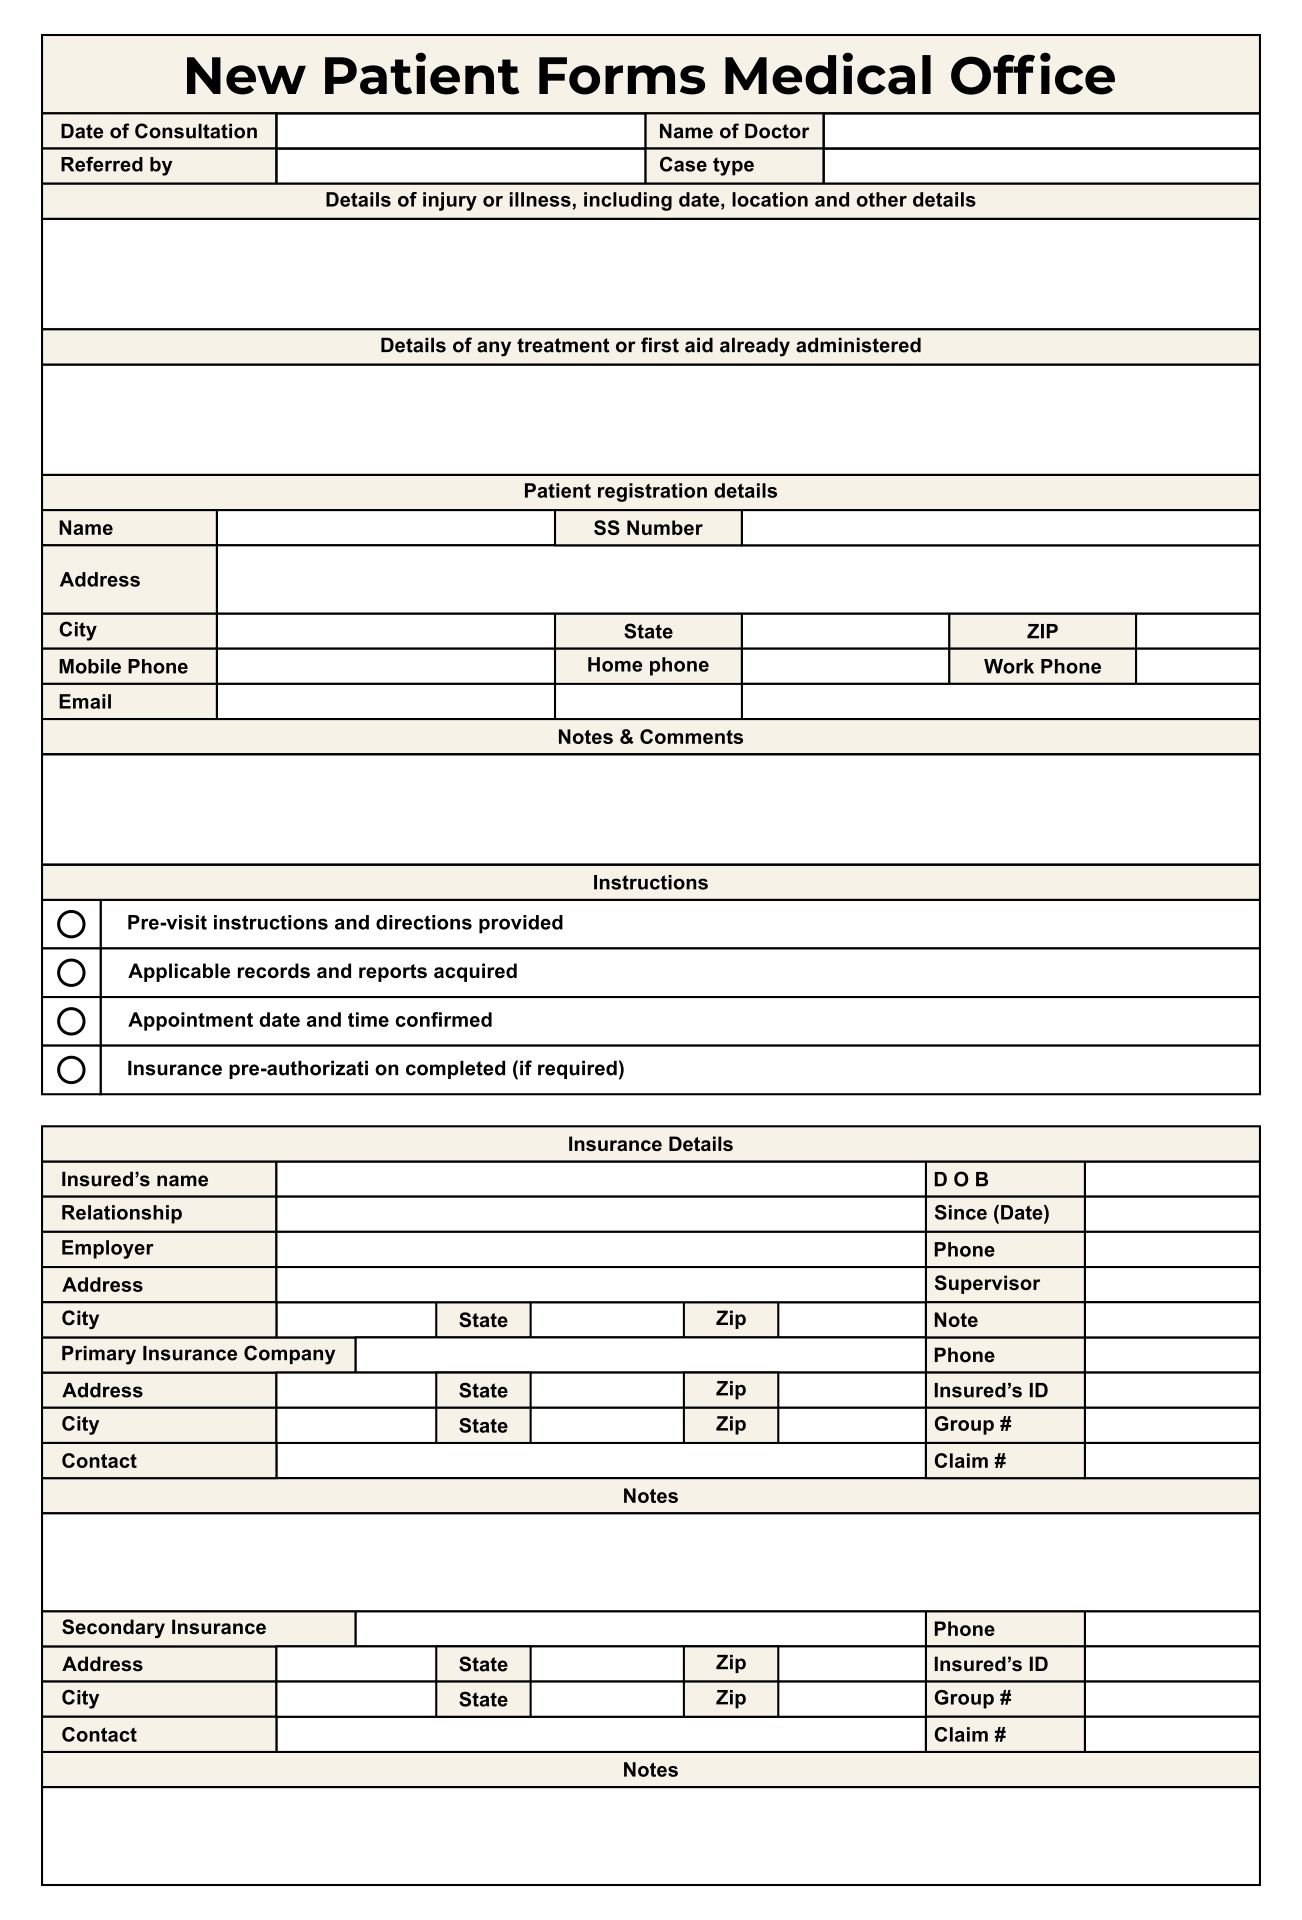 New Patient Forms Medical Office